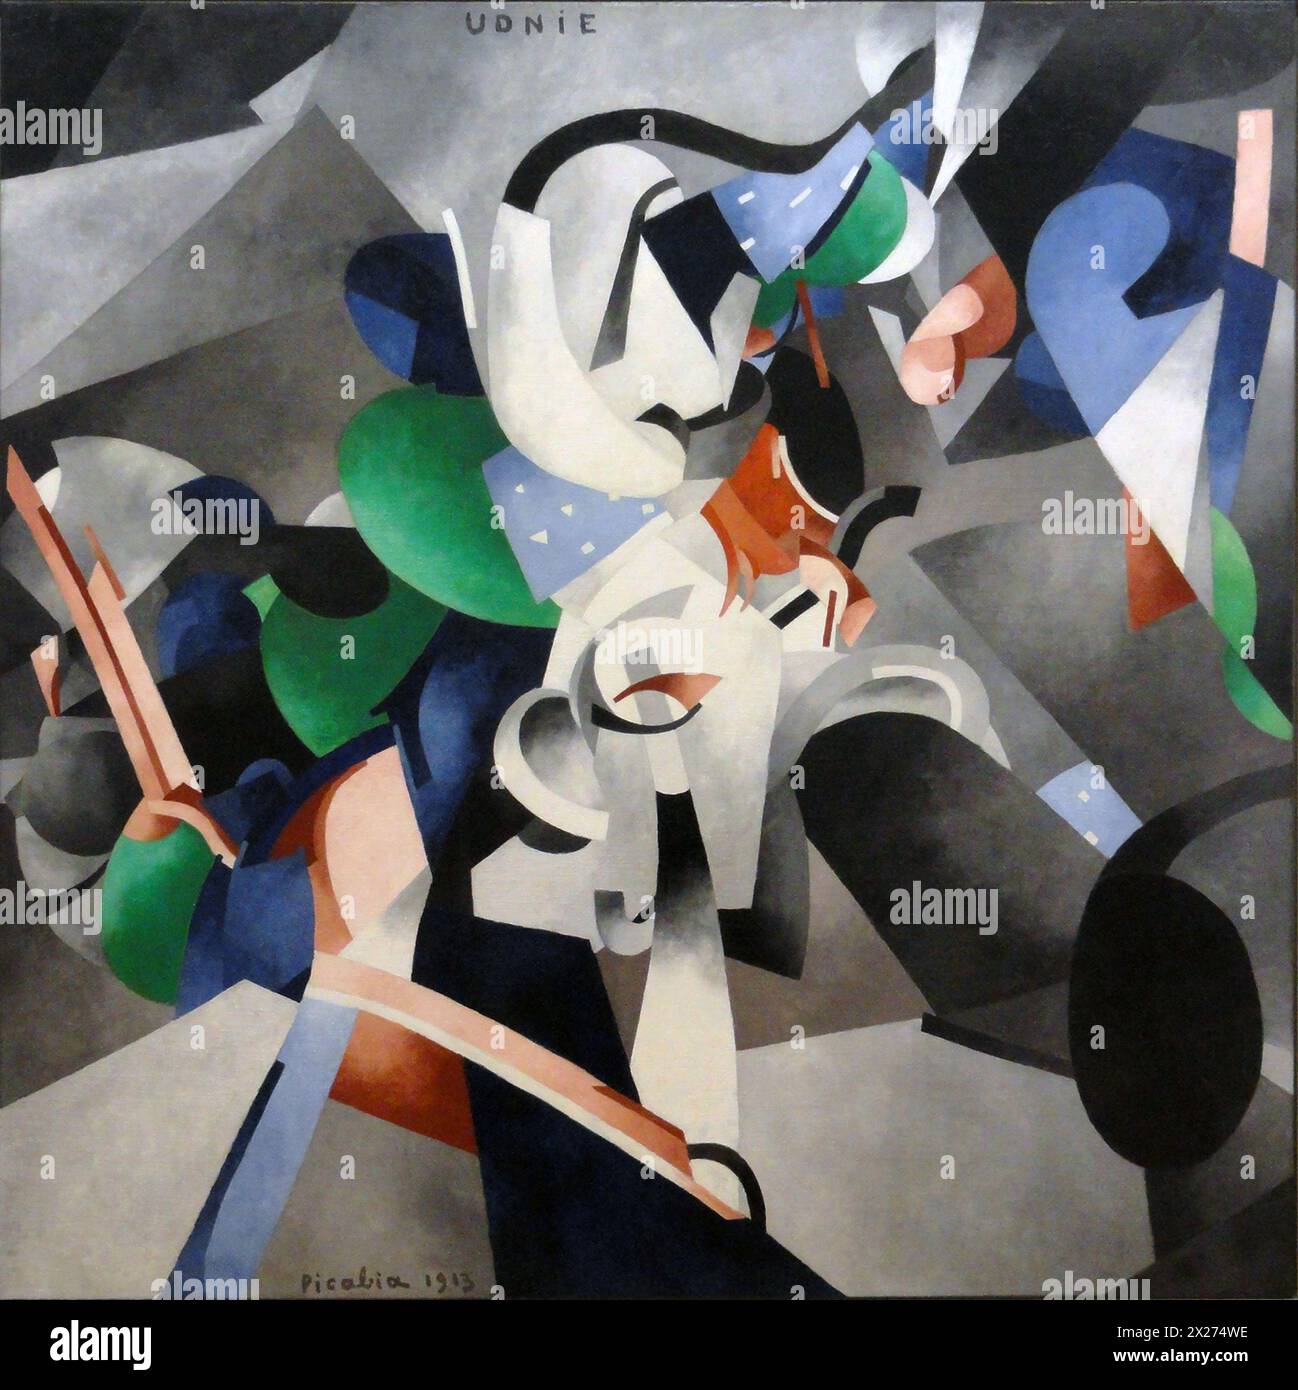 Francis Picabia, Udnie (Young American Girl, The Dance), 1913 Stock Photo